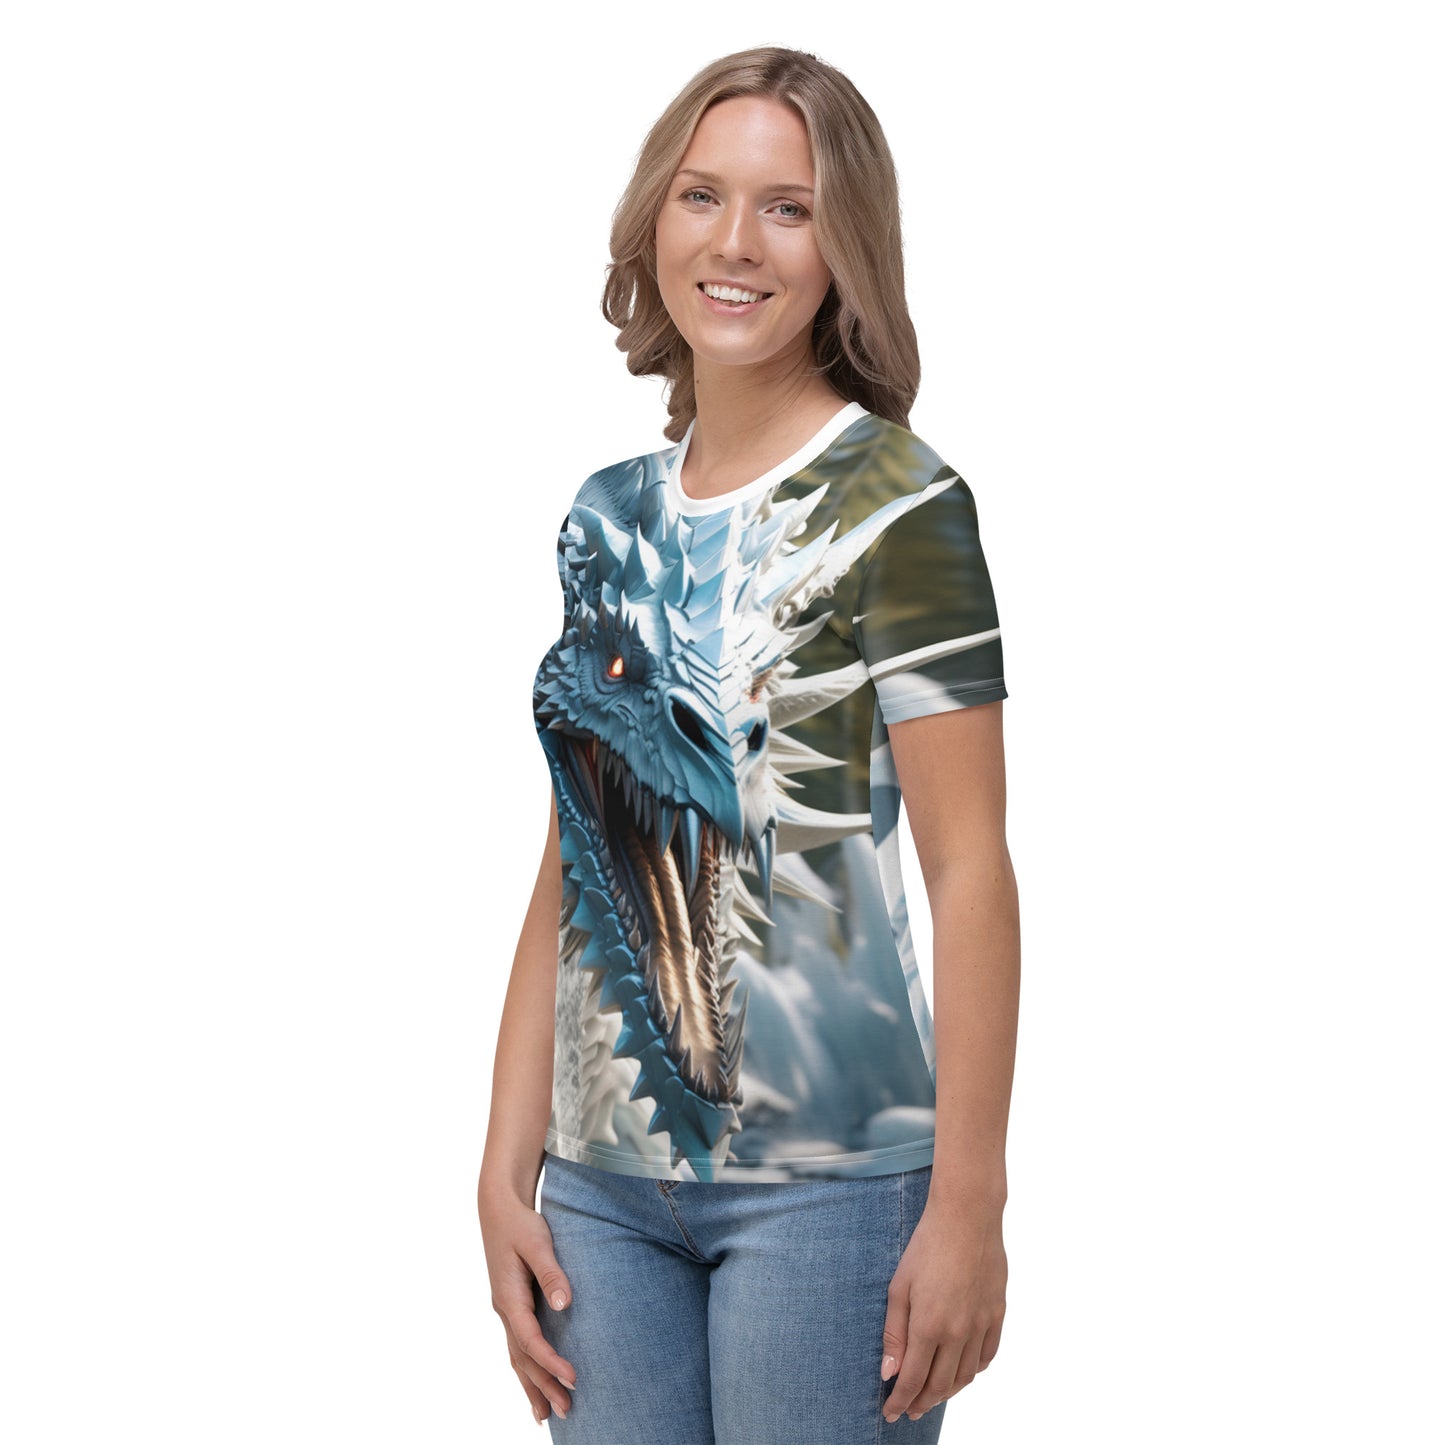 Ice Dragon Fitted Women's T-shirt